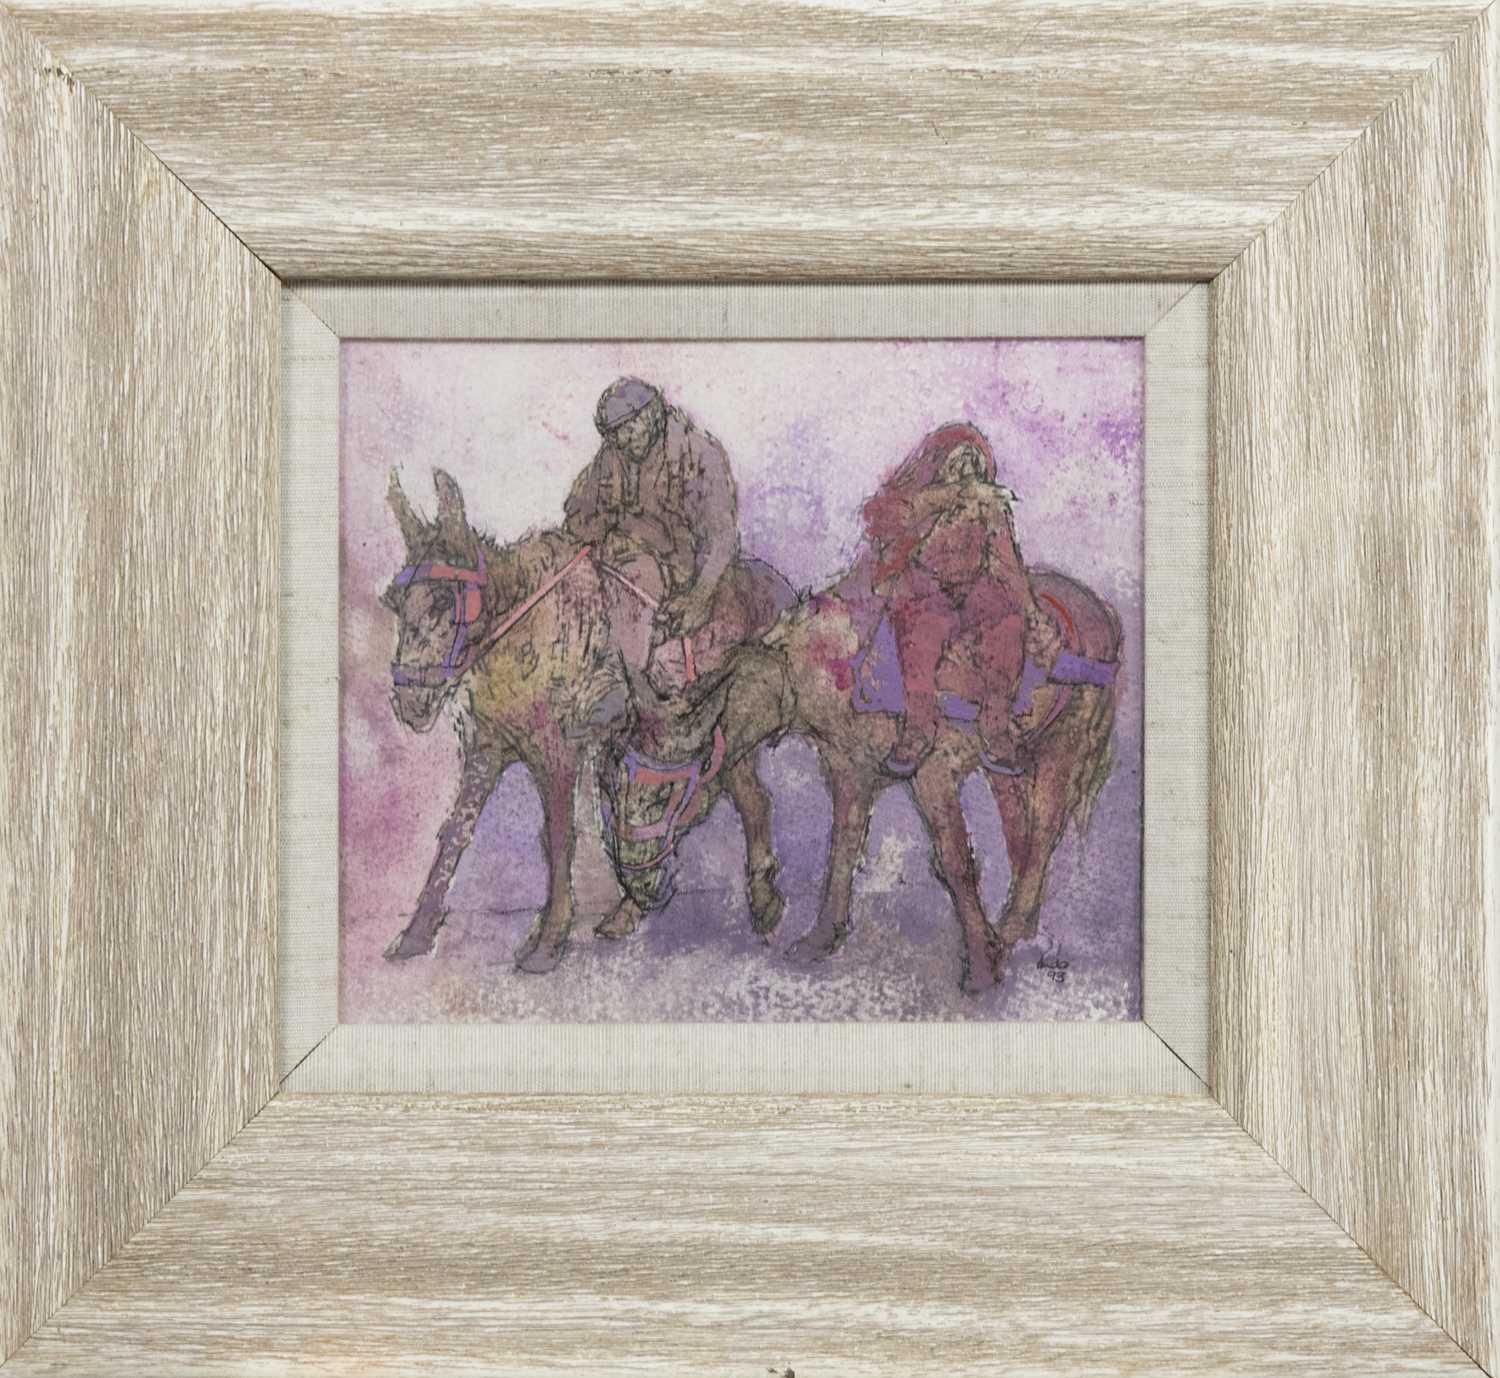 MULES OF ARMACAO, A MIXED MEDIA BY ANDA PATERSON